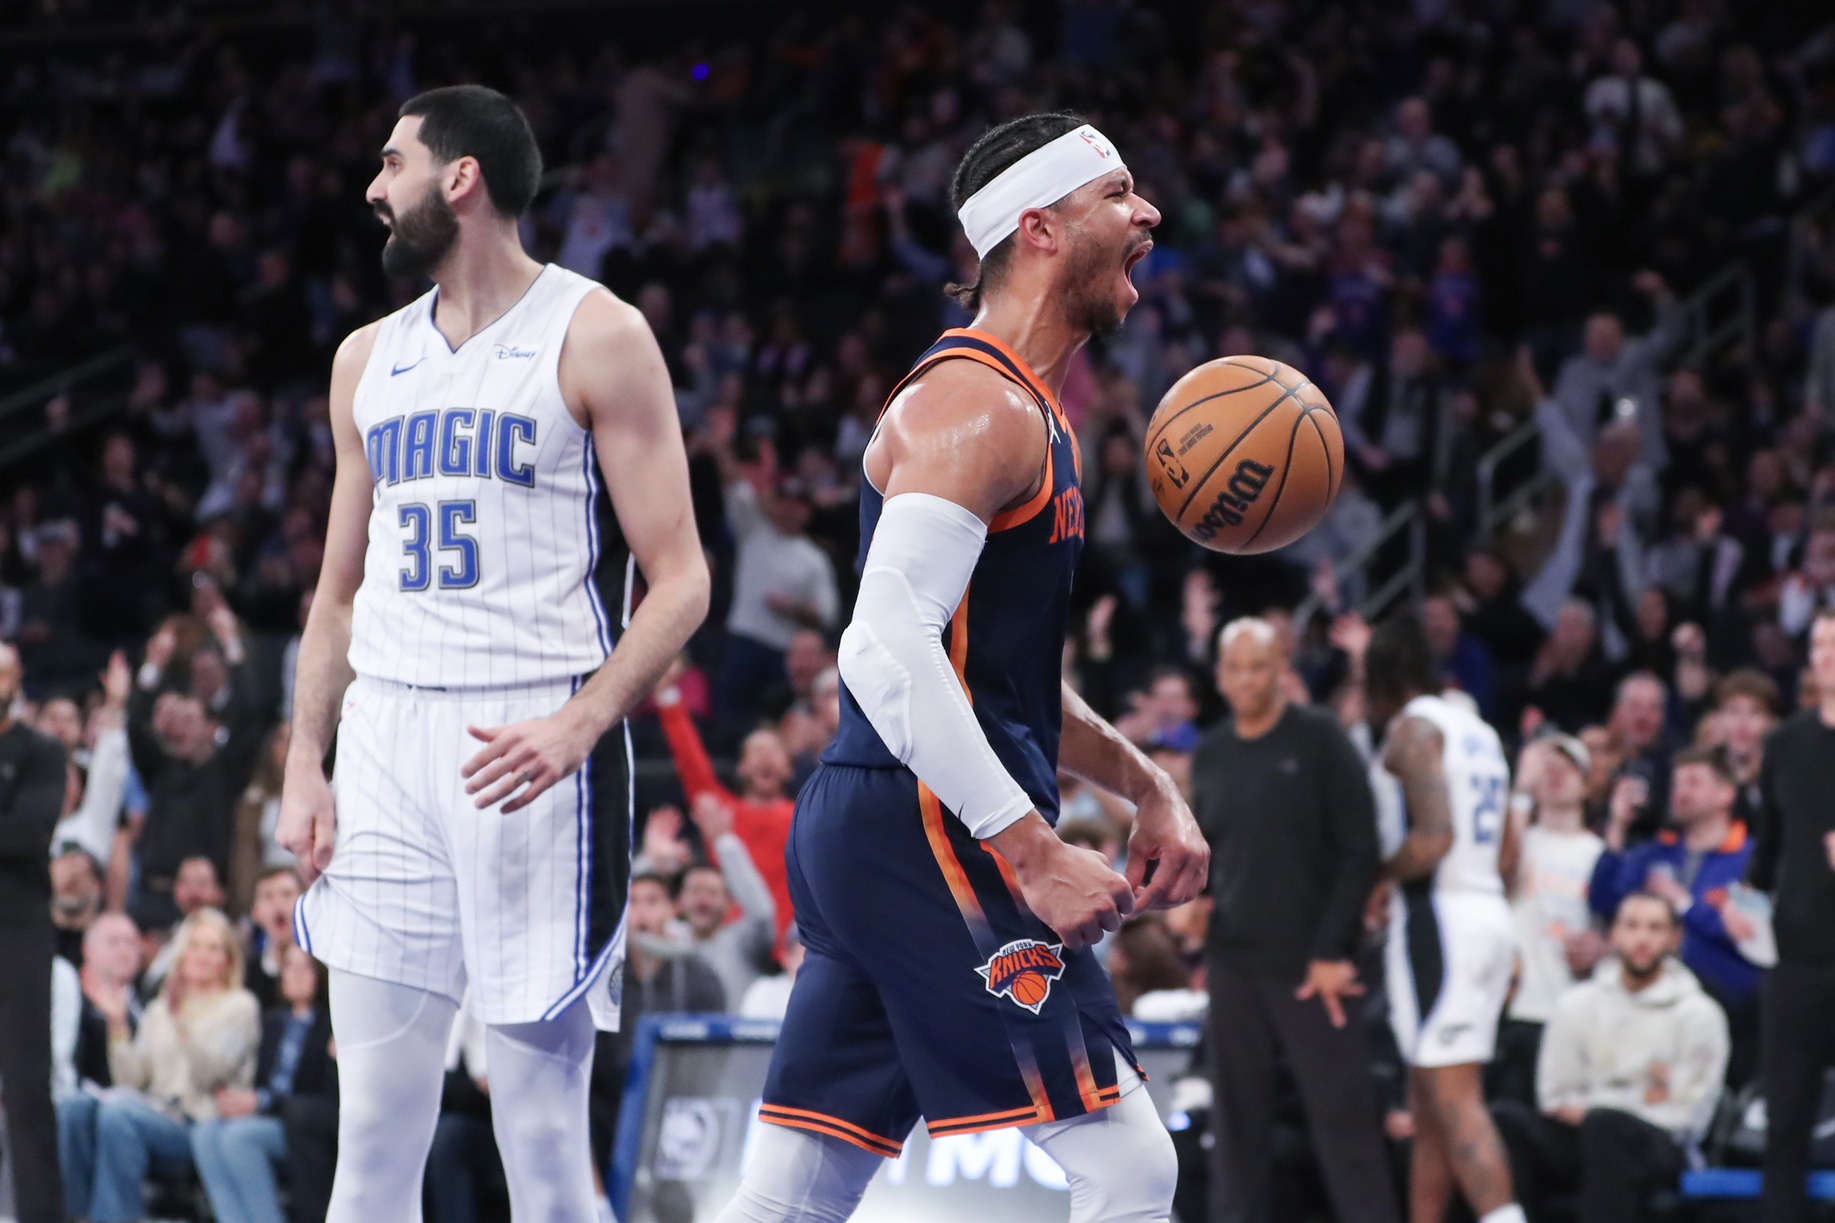 How This New York Knicks Guard Has Elevated The Team - Last Word